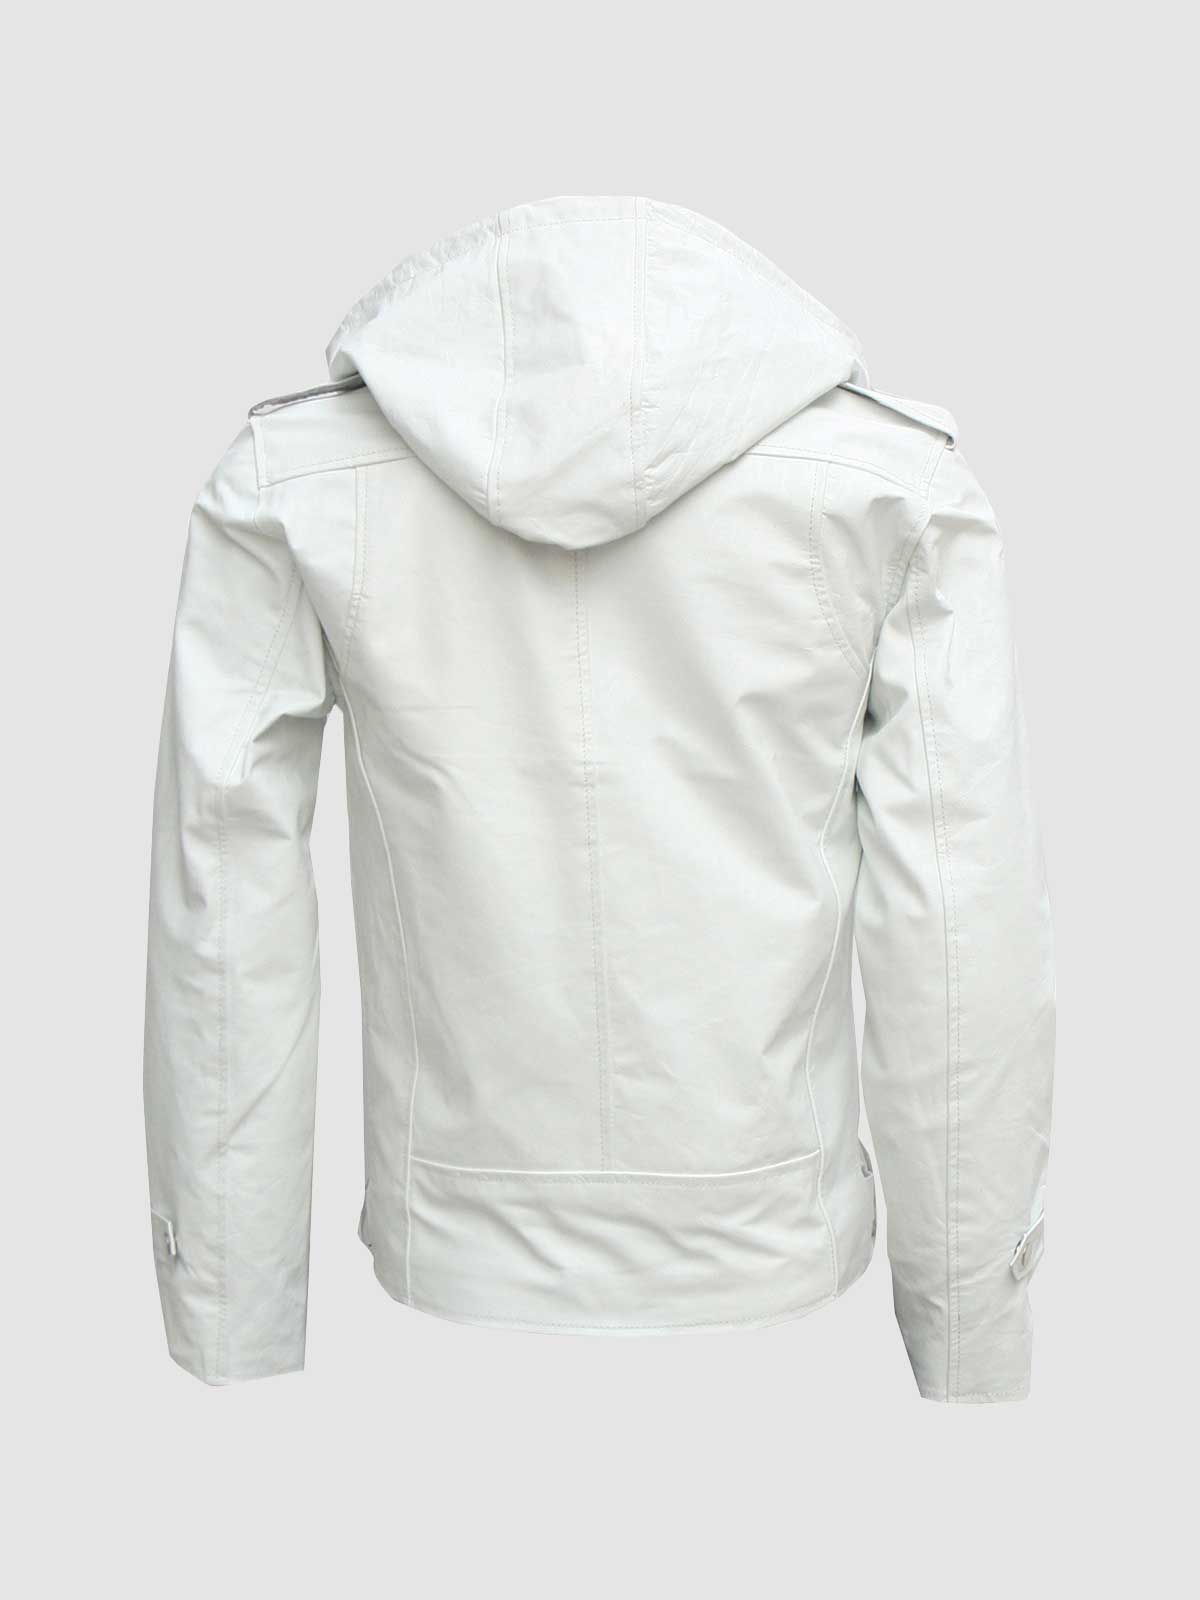 Leather Jackets - White - men - 25 products